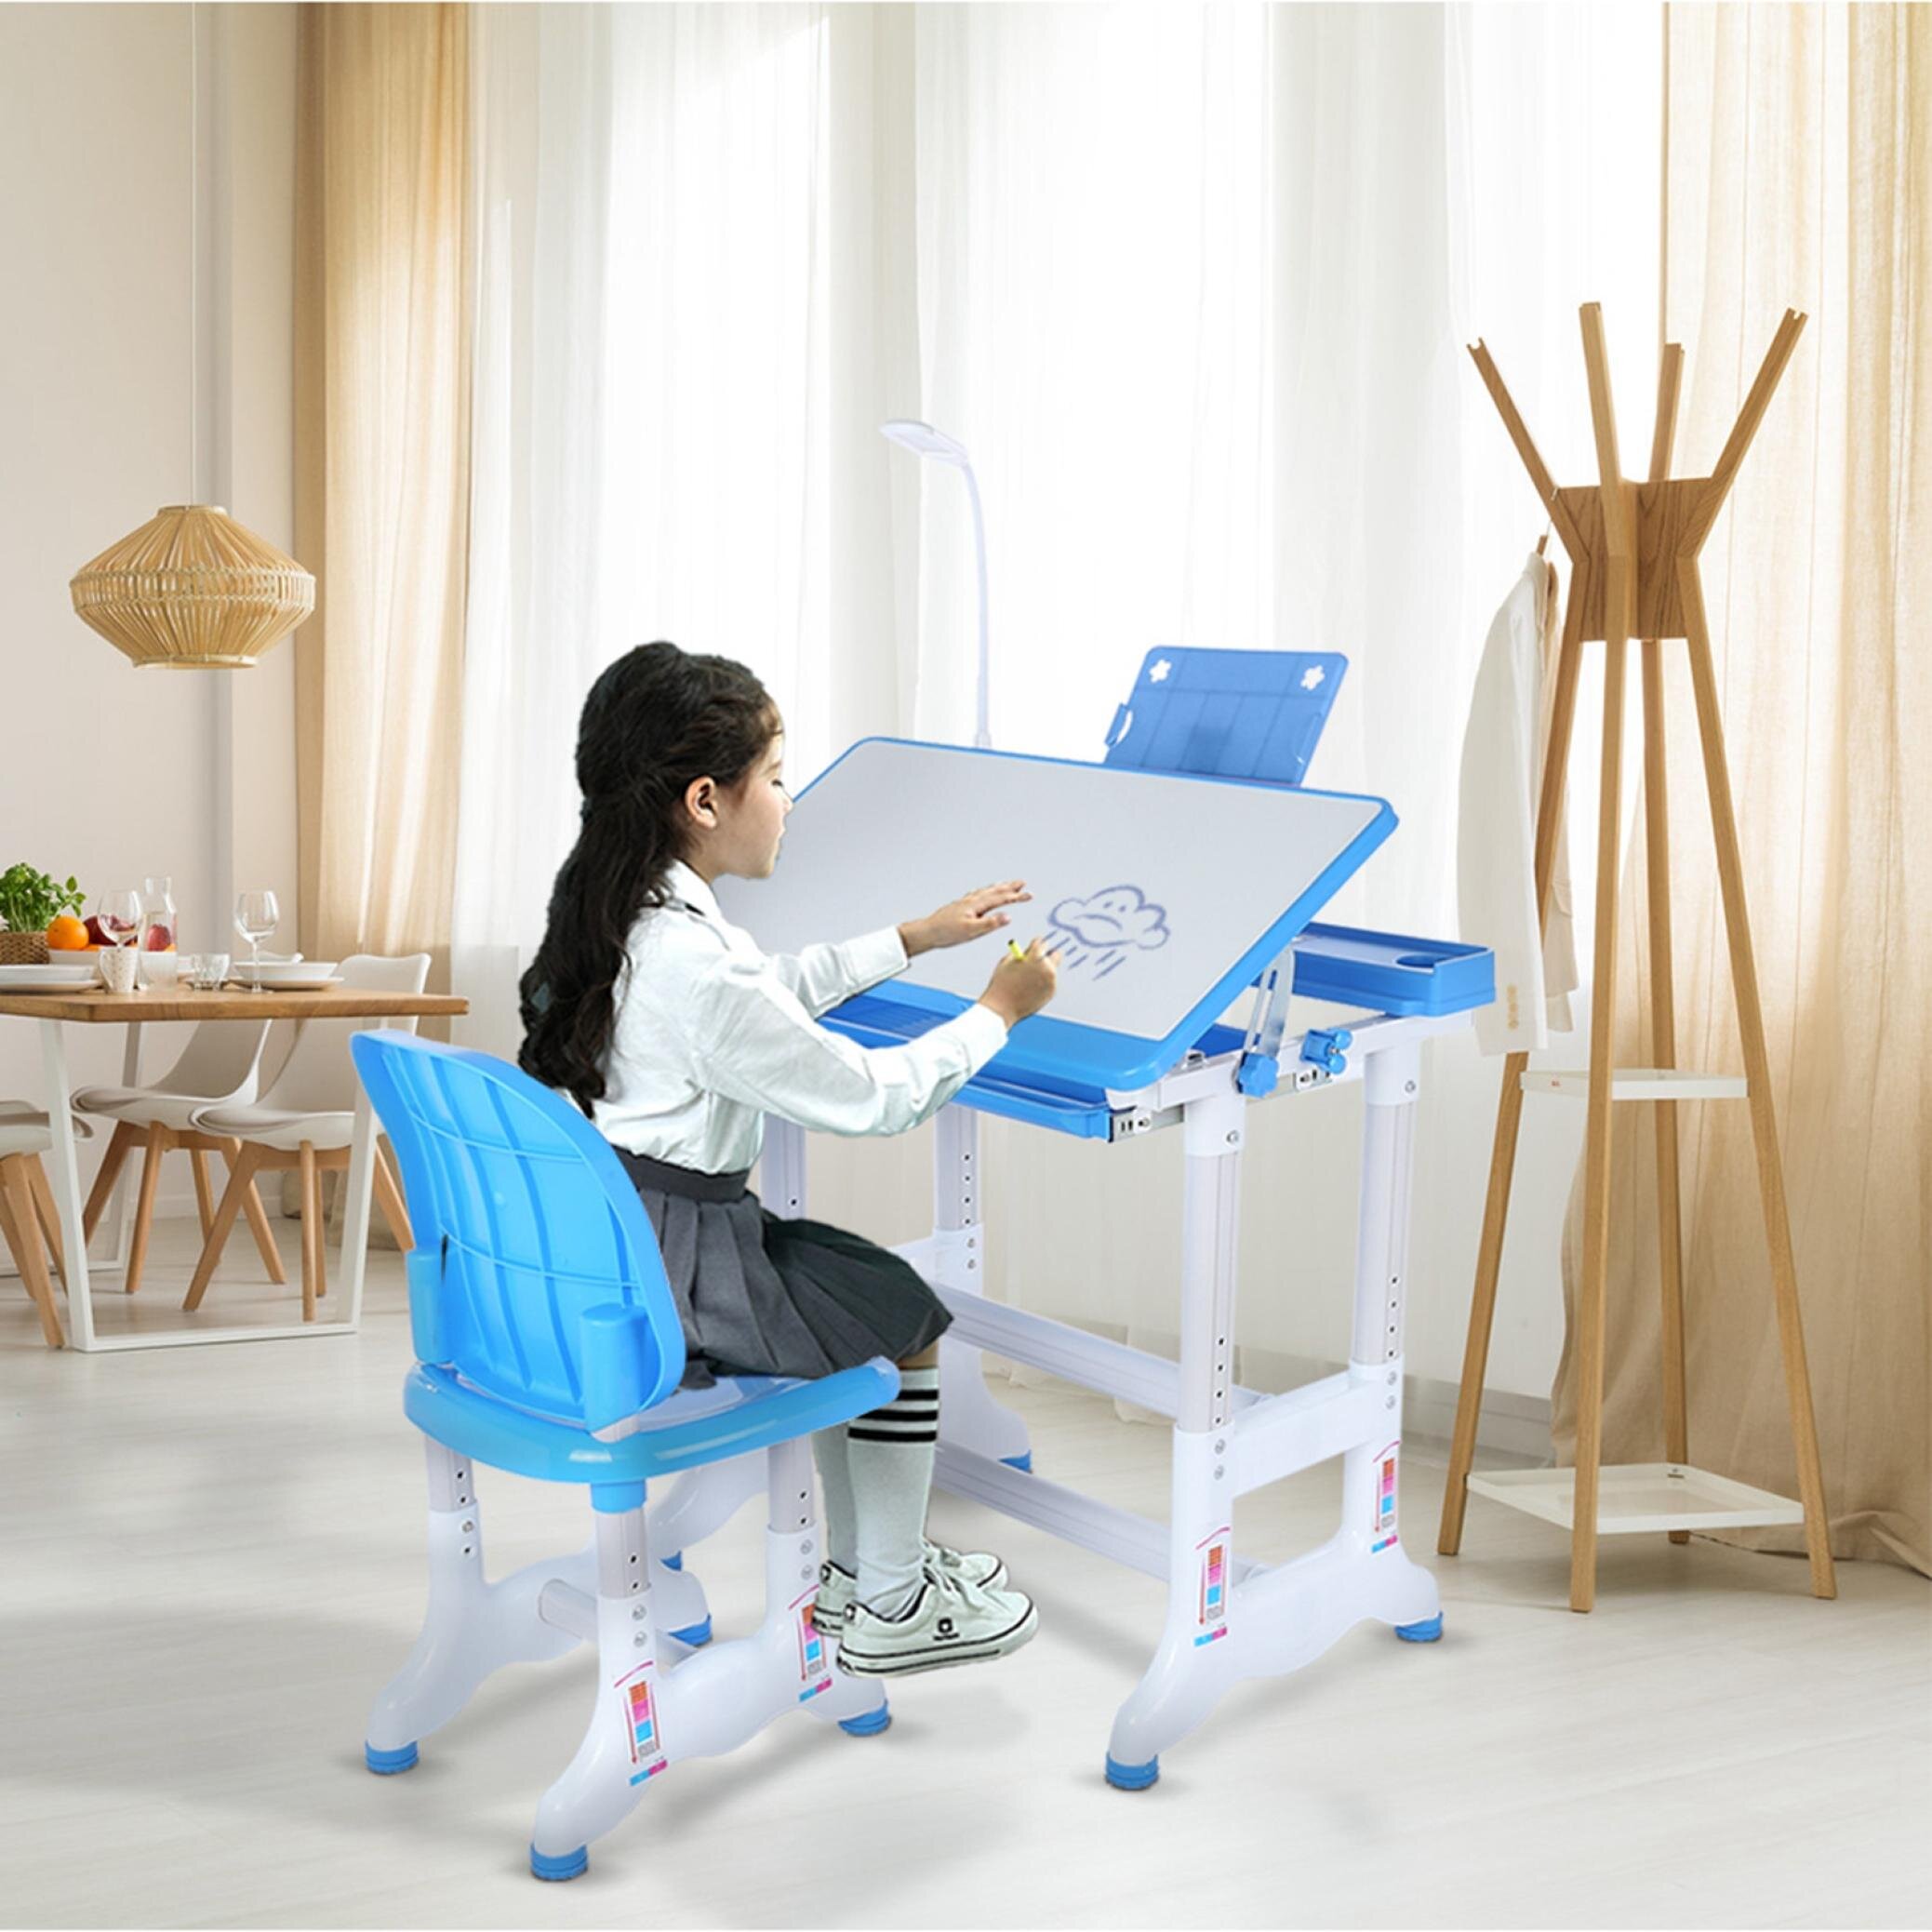 Bamny Childrens Study Desk and Chair Set, Kids Desk with Eye-Protection Lamp, Bookstand, Tilted Desktop, Ergonomically Height-Adjustable Childrens Table  Blue 